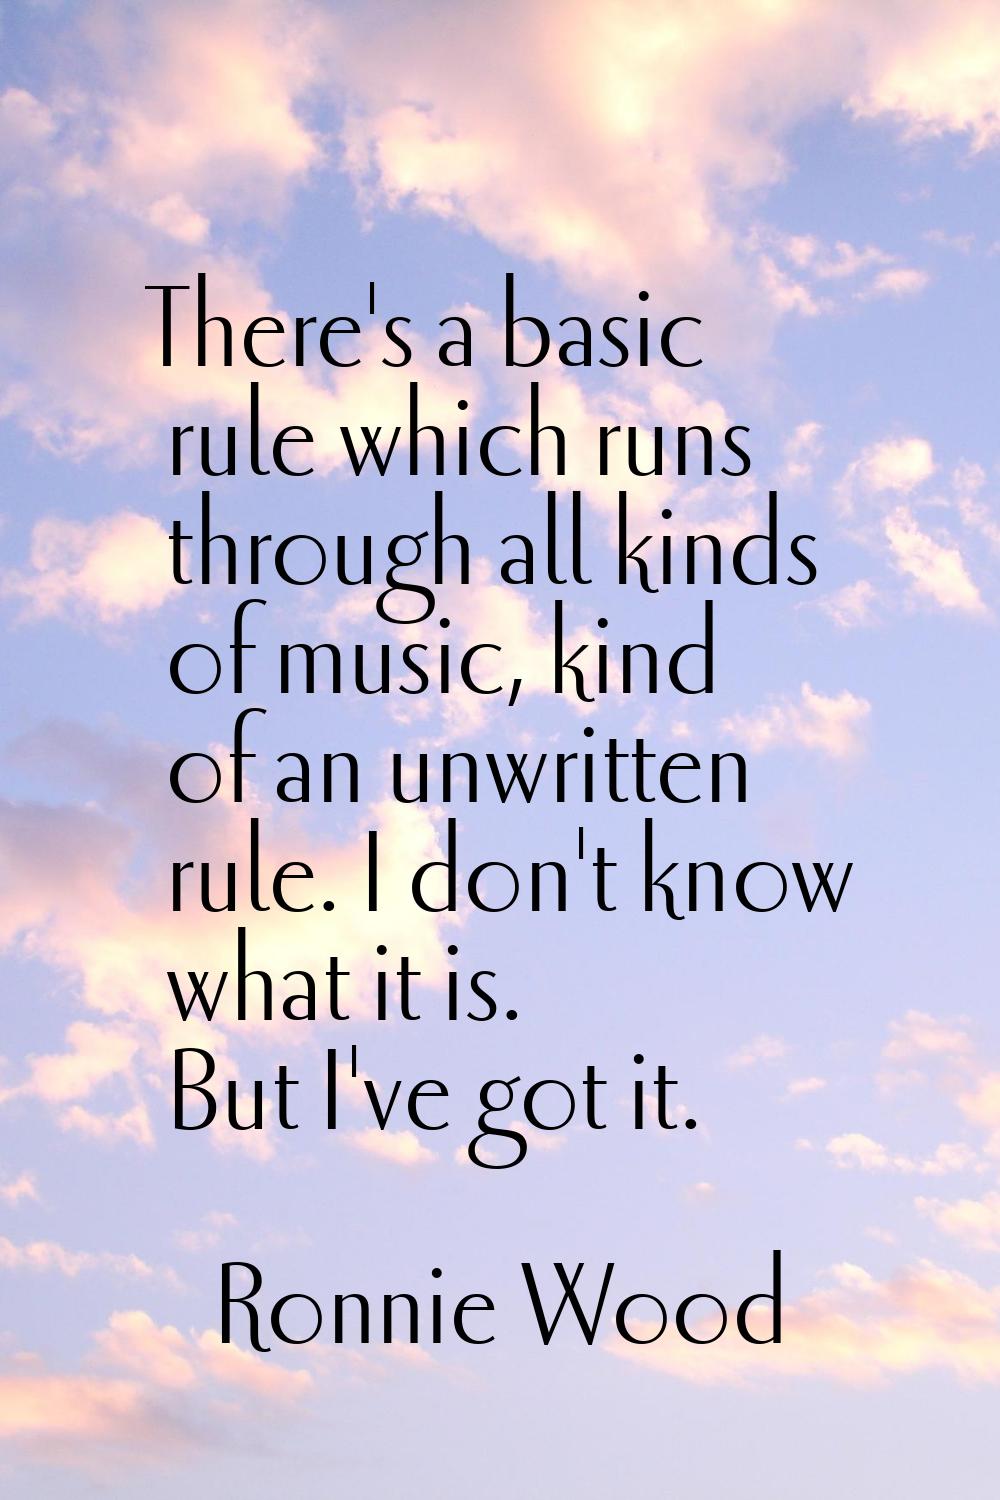 There's a basic rule which runs through all kinds of music, kind of an unwritten rule. I don't know